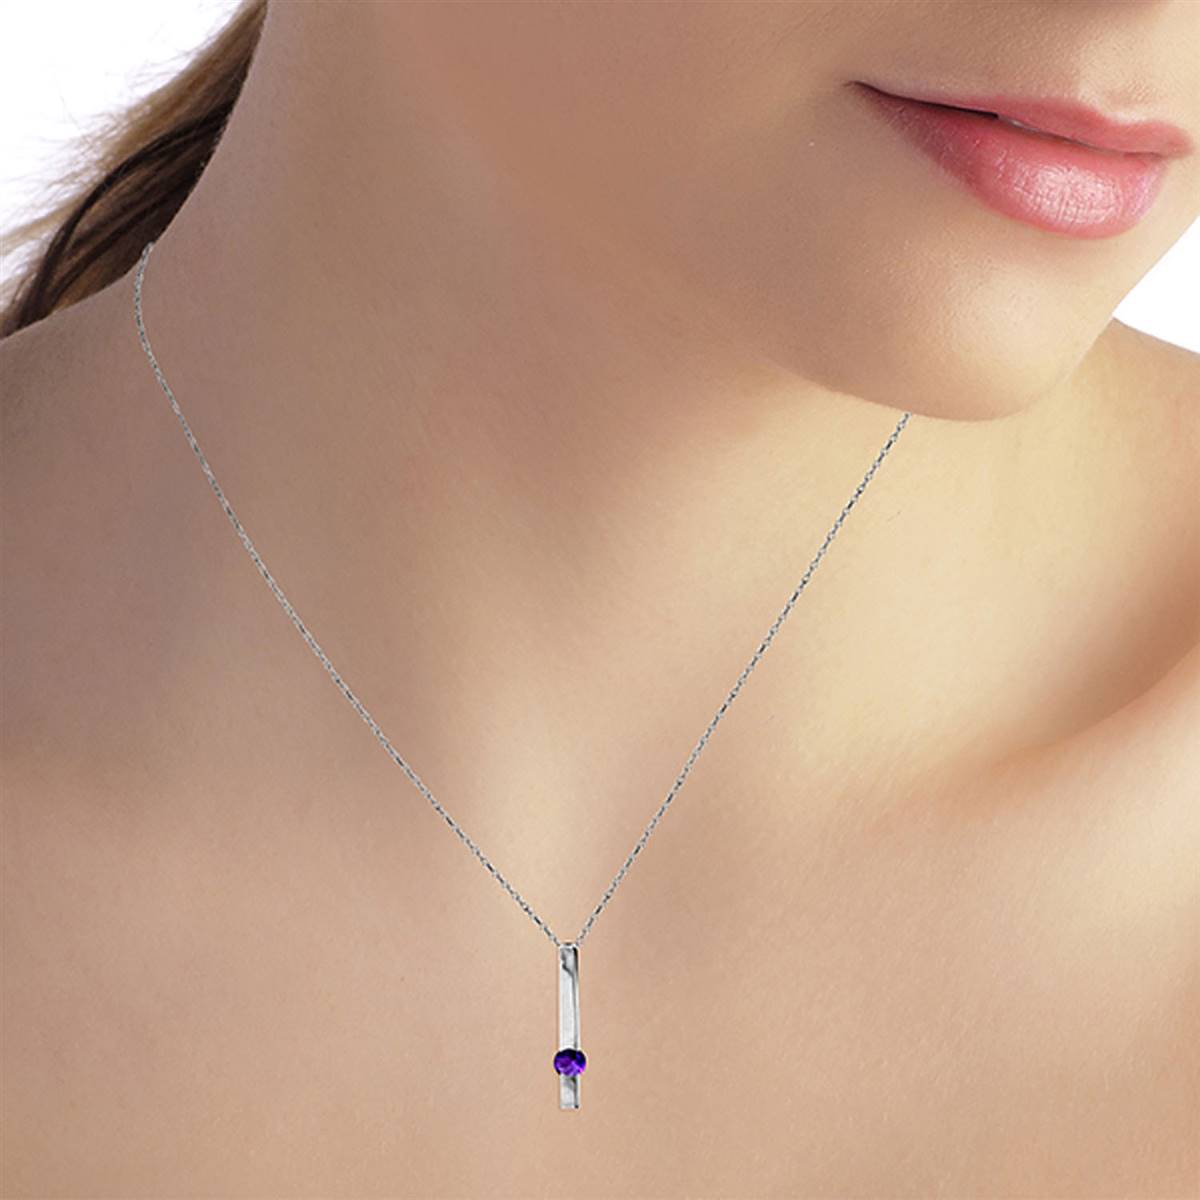 0.25 Carat 14K Solid White Gold Persistent Echo Amethyst Necklace